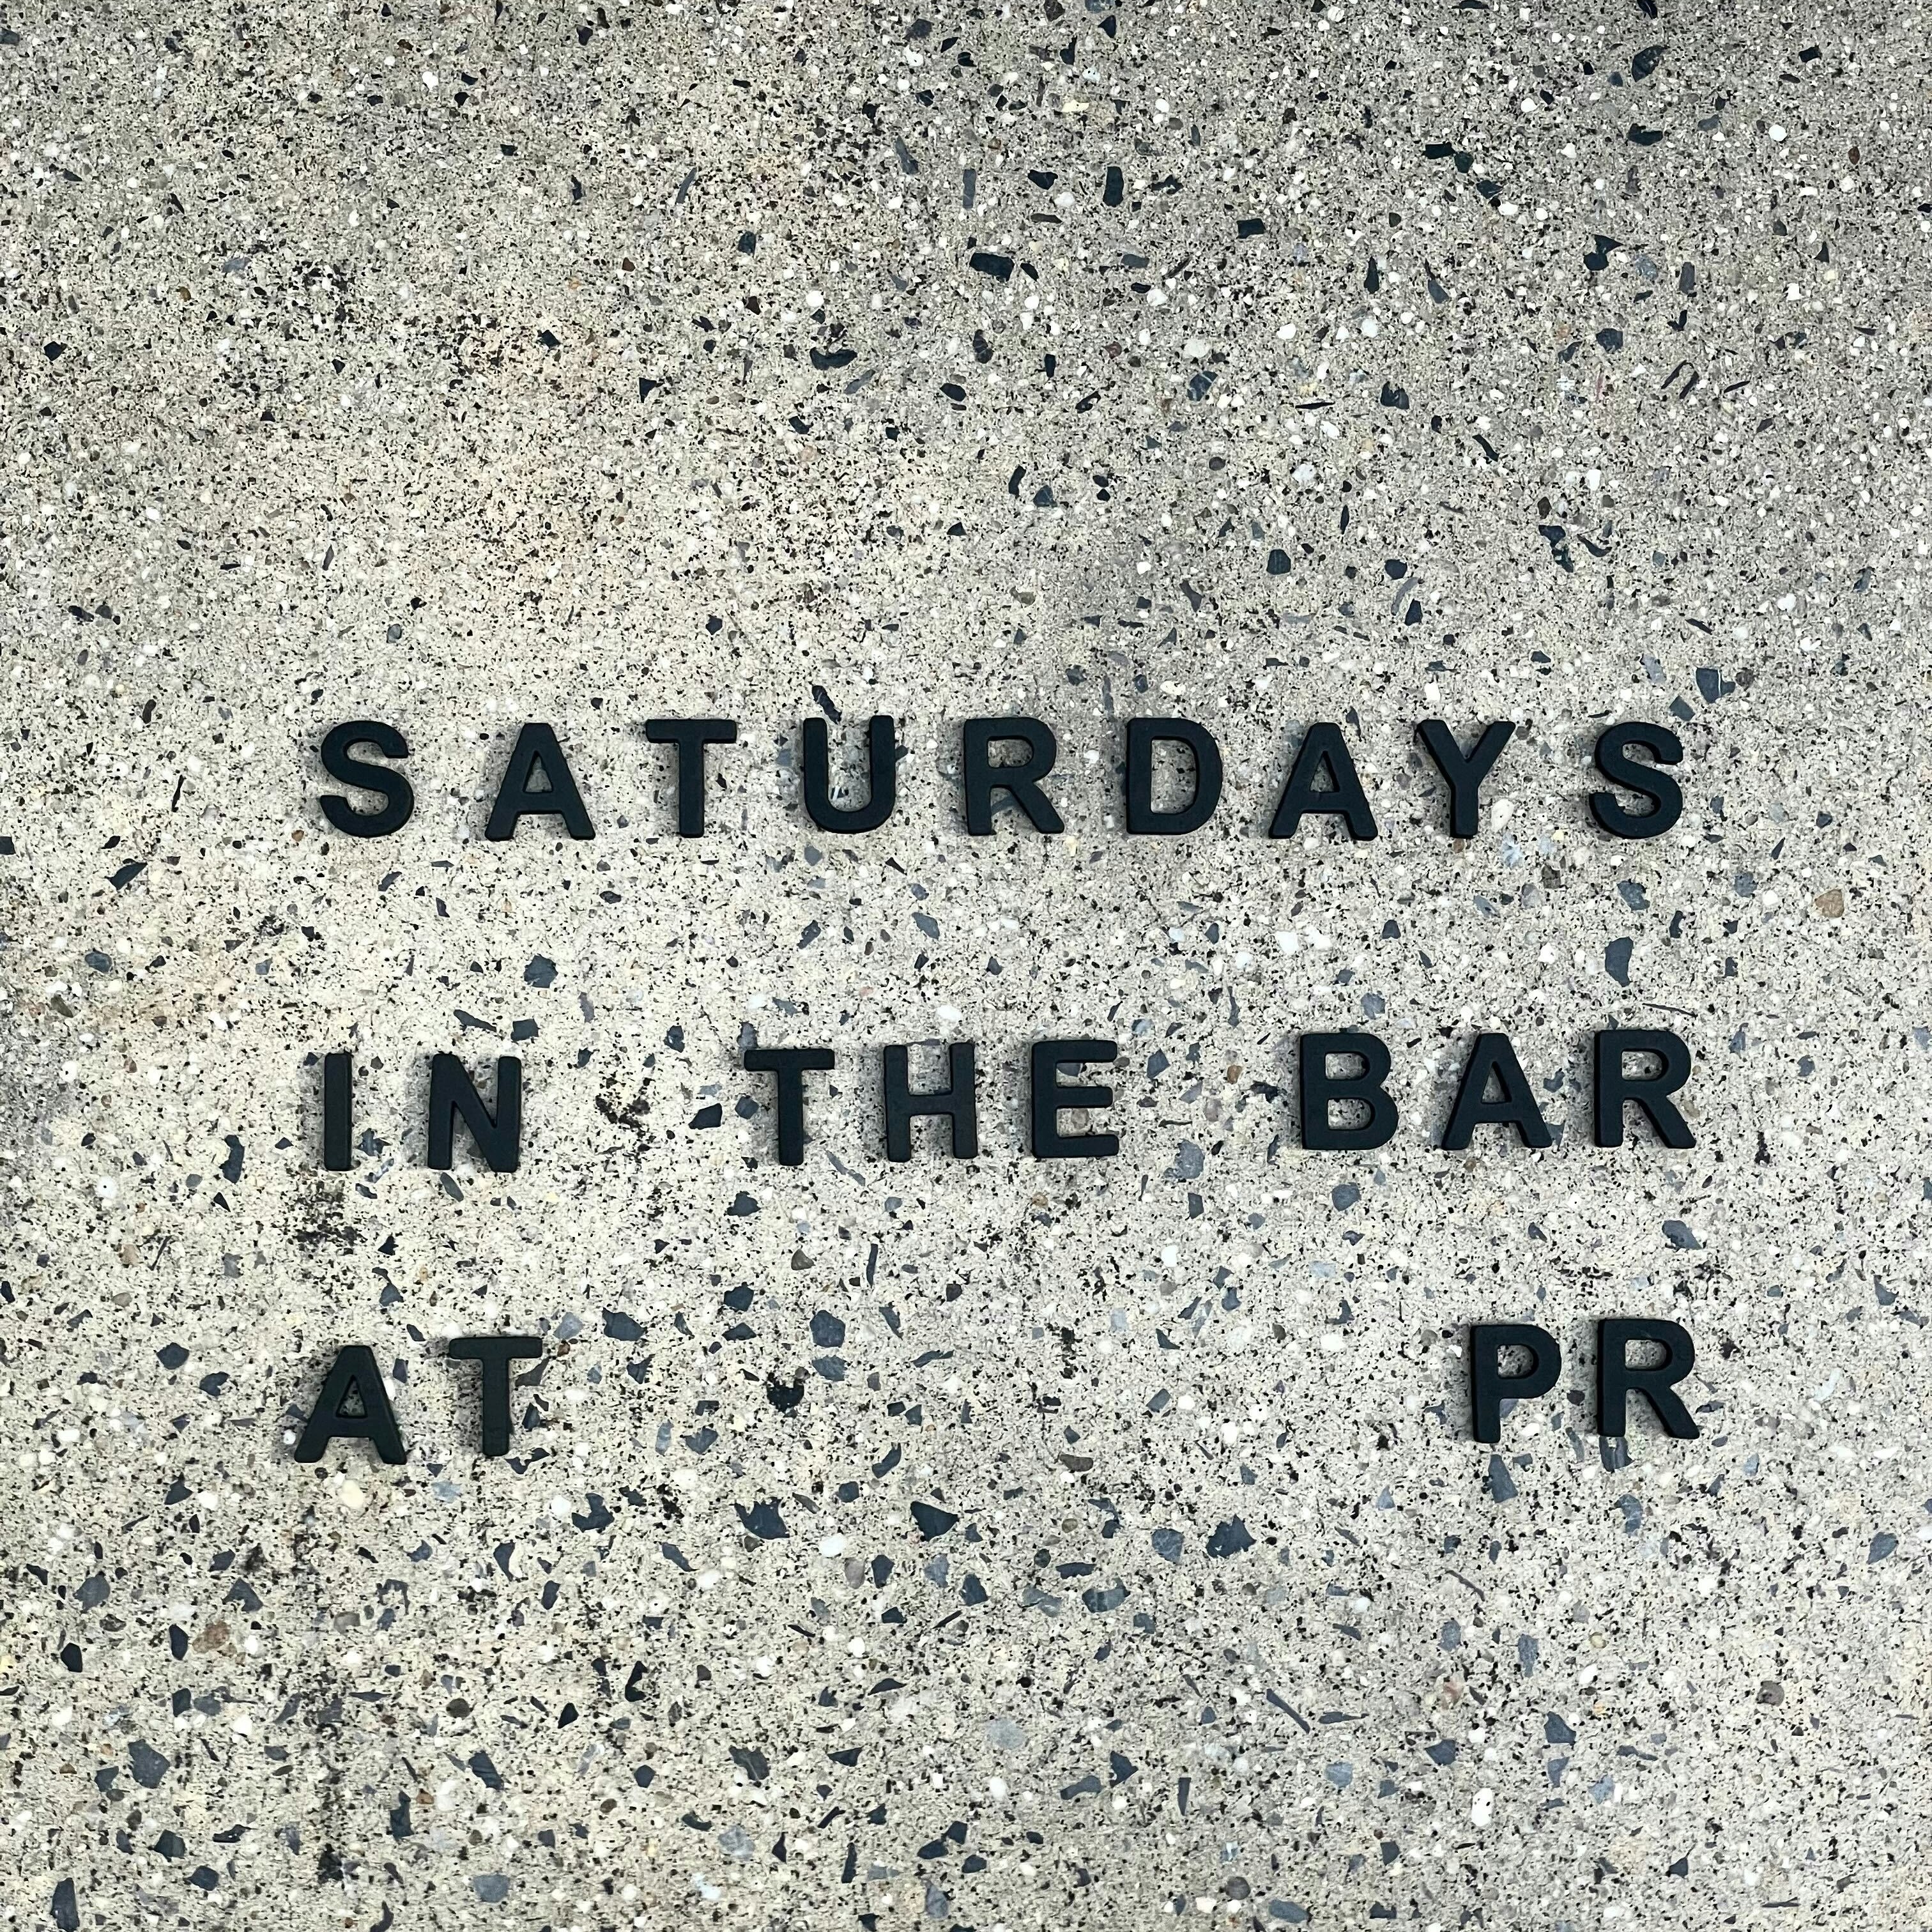 Saturdays In the Bar at Public Records